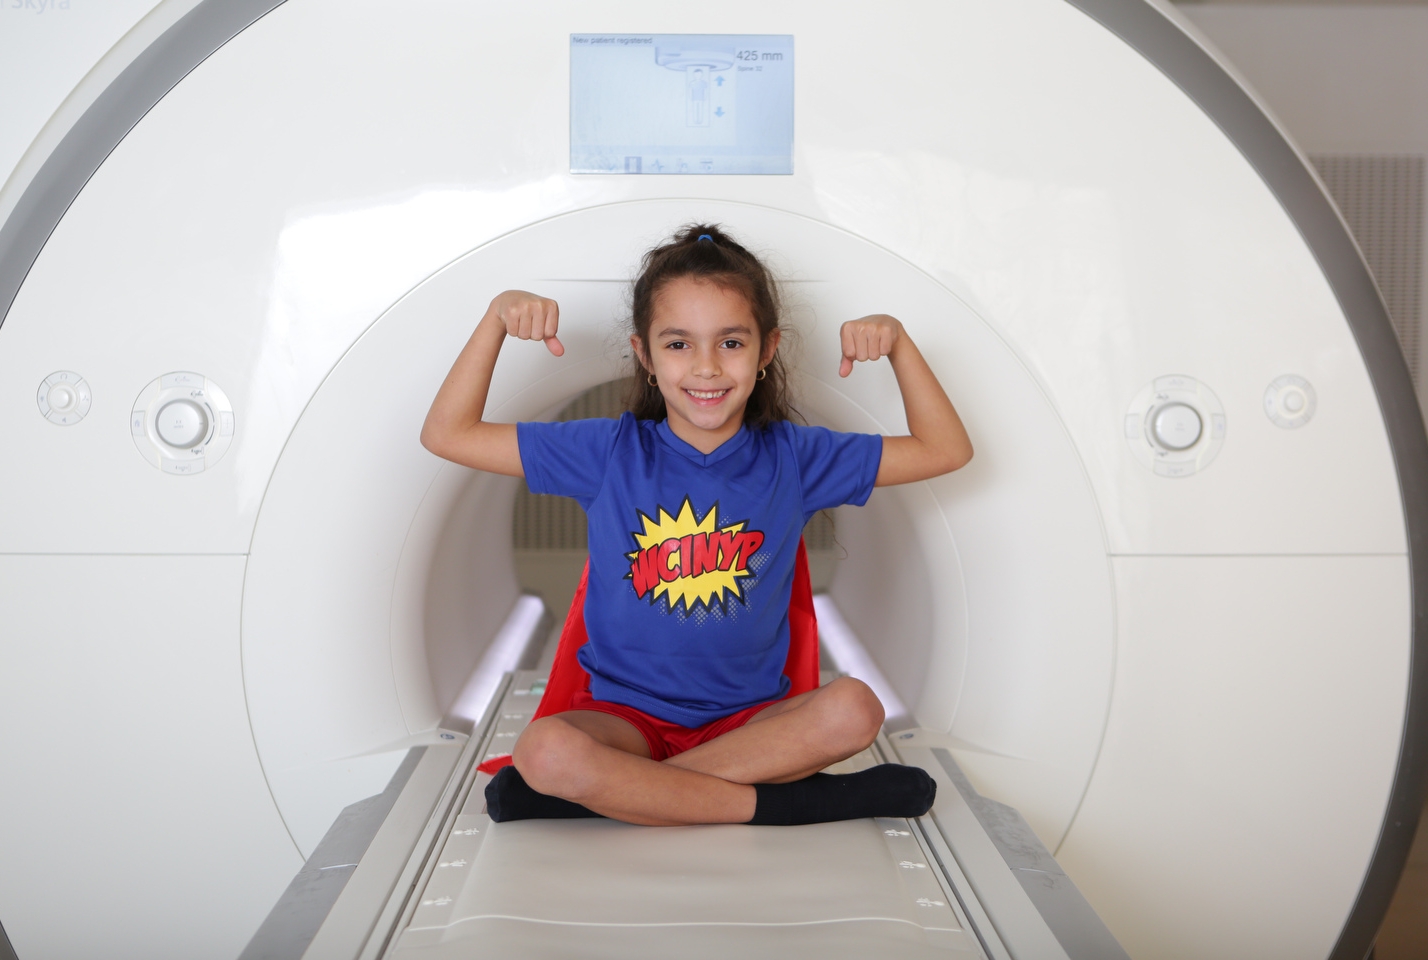 A young girl poses in an MRI machine